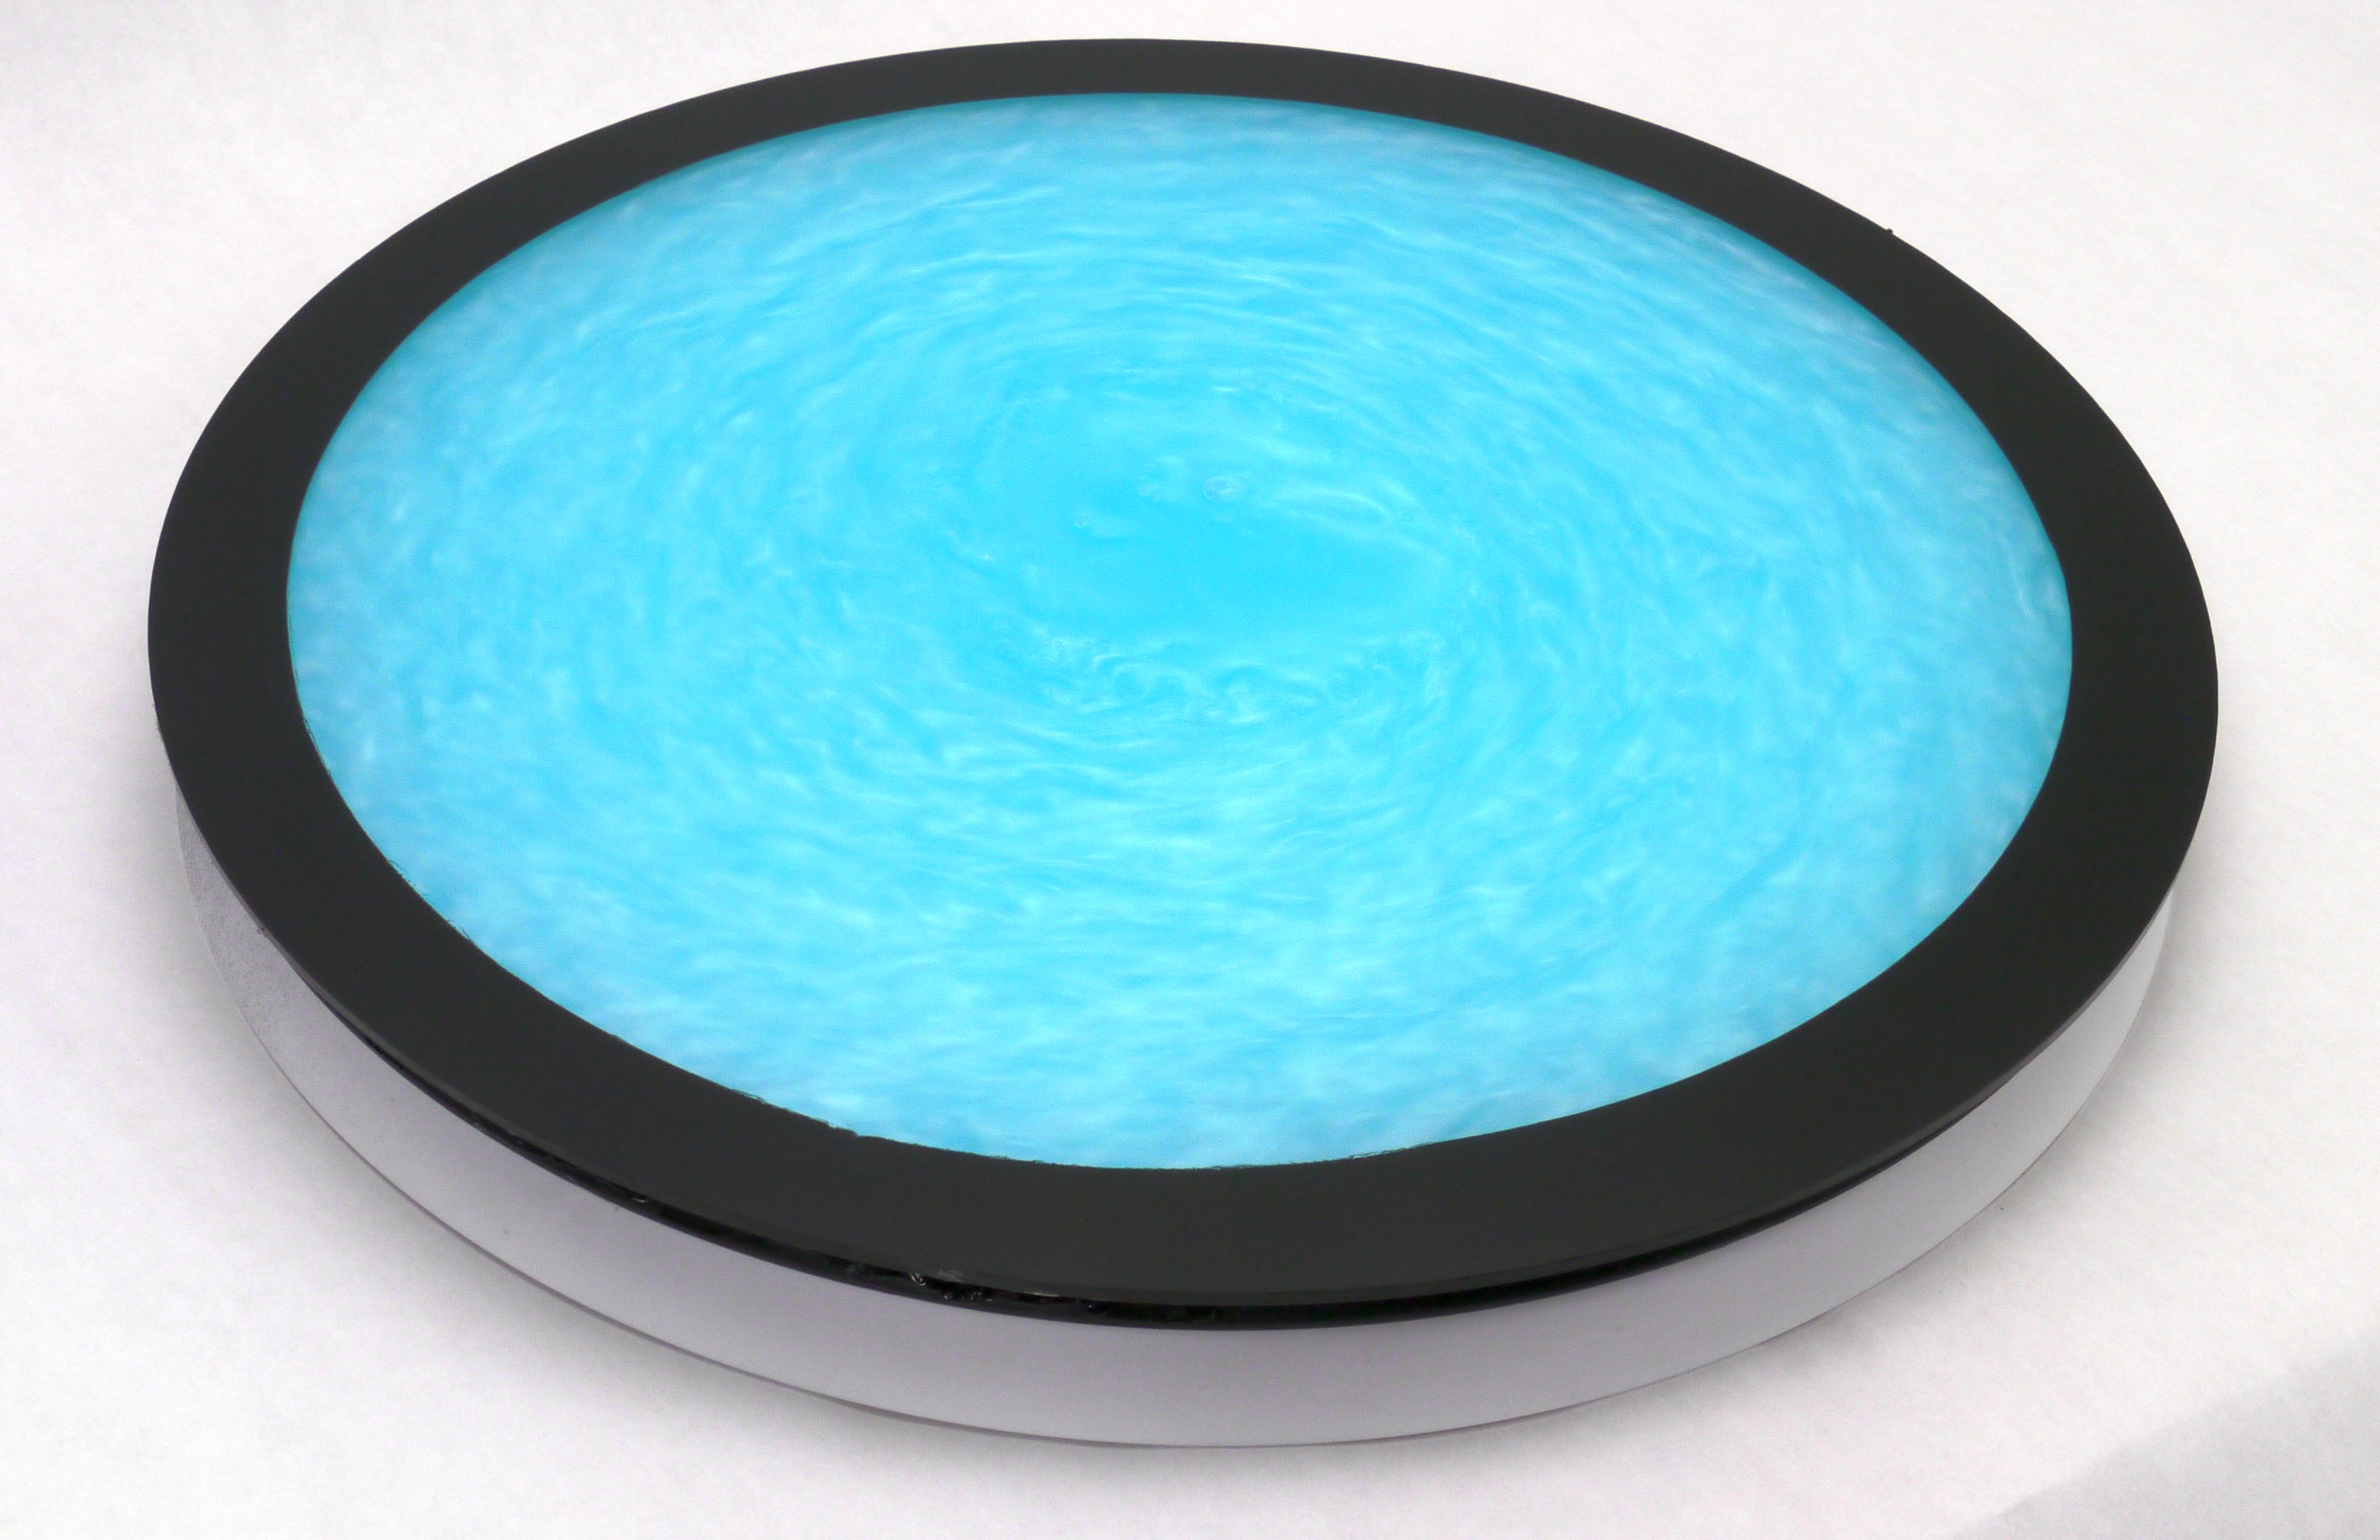 Colorful fluid-filled turntable shows mesmerizing turbulence